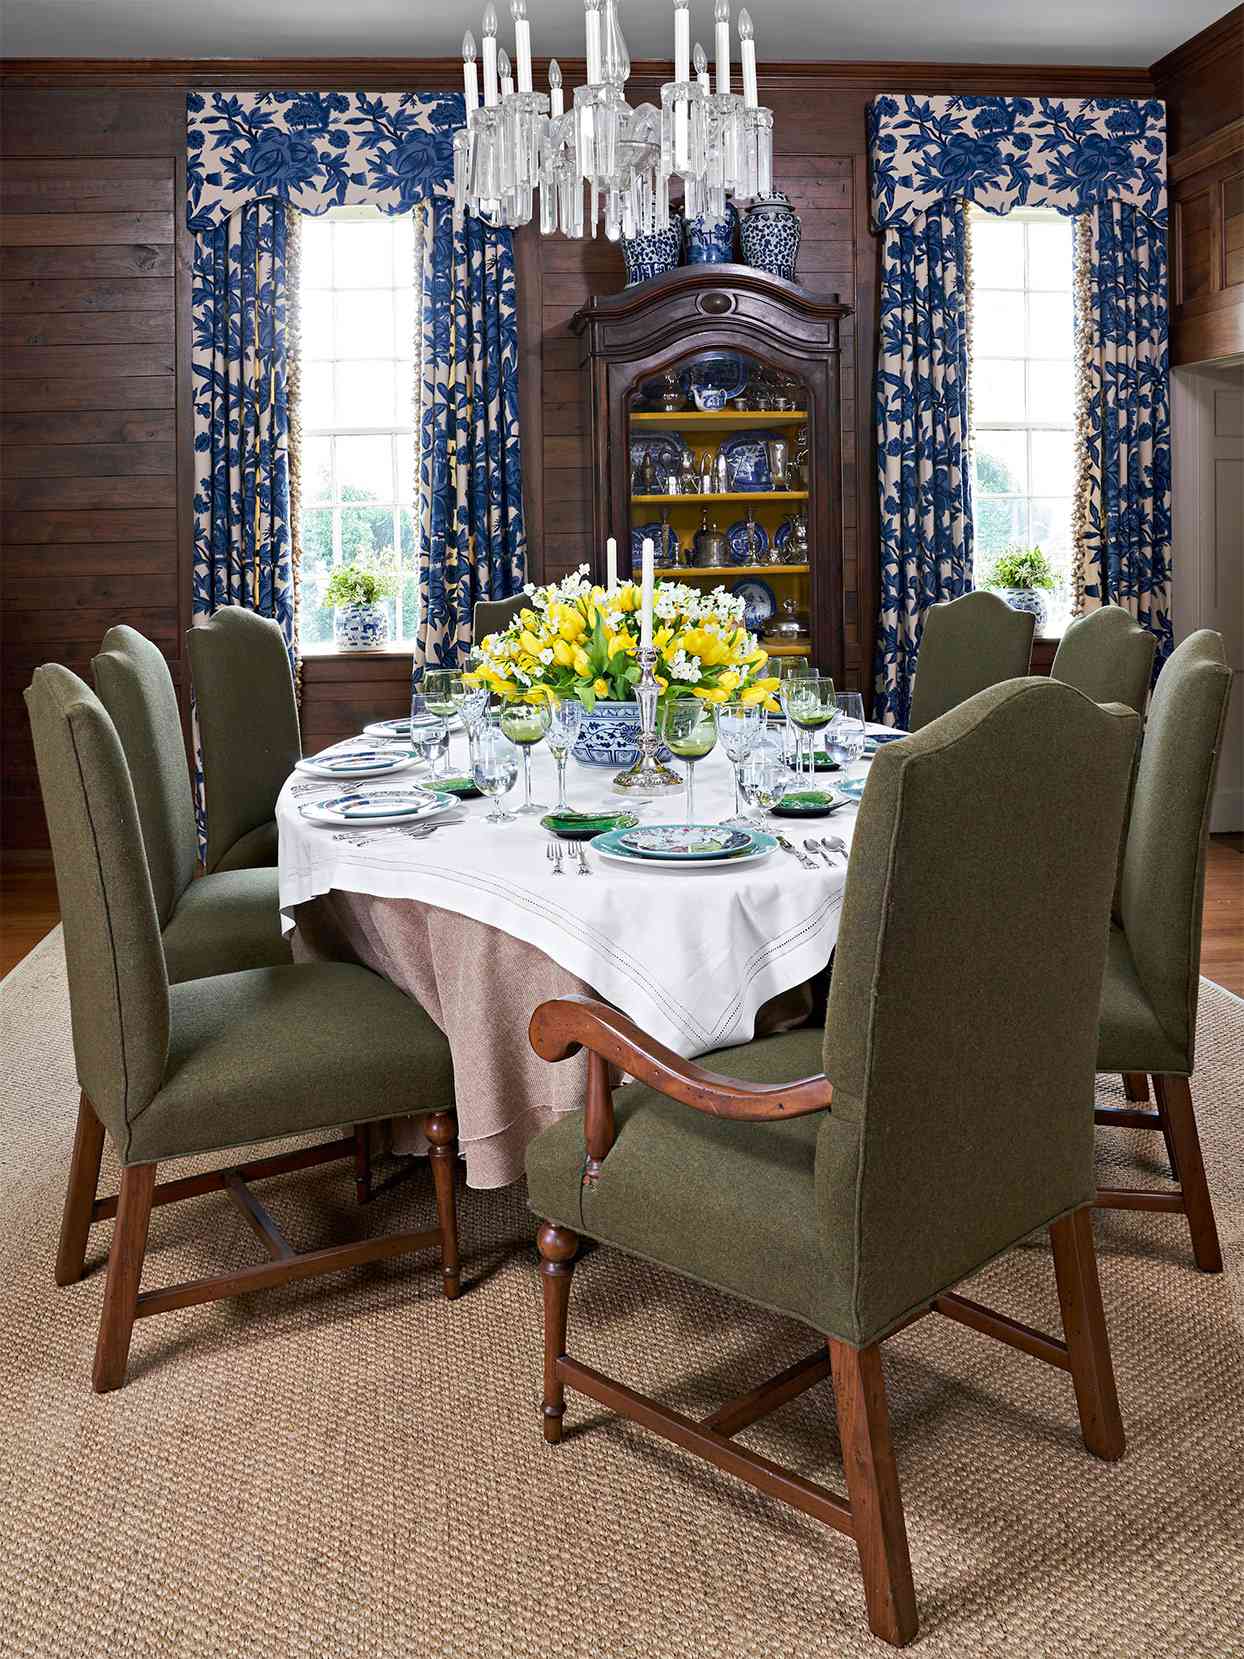 traditional dining room wood paneled walls green chairs yellow centerpiece